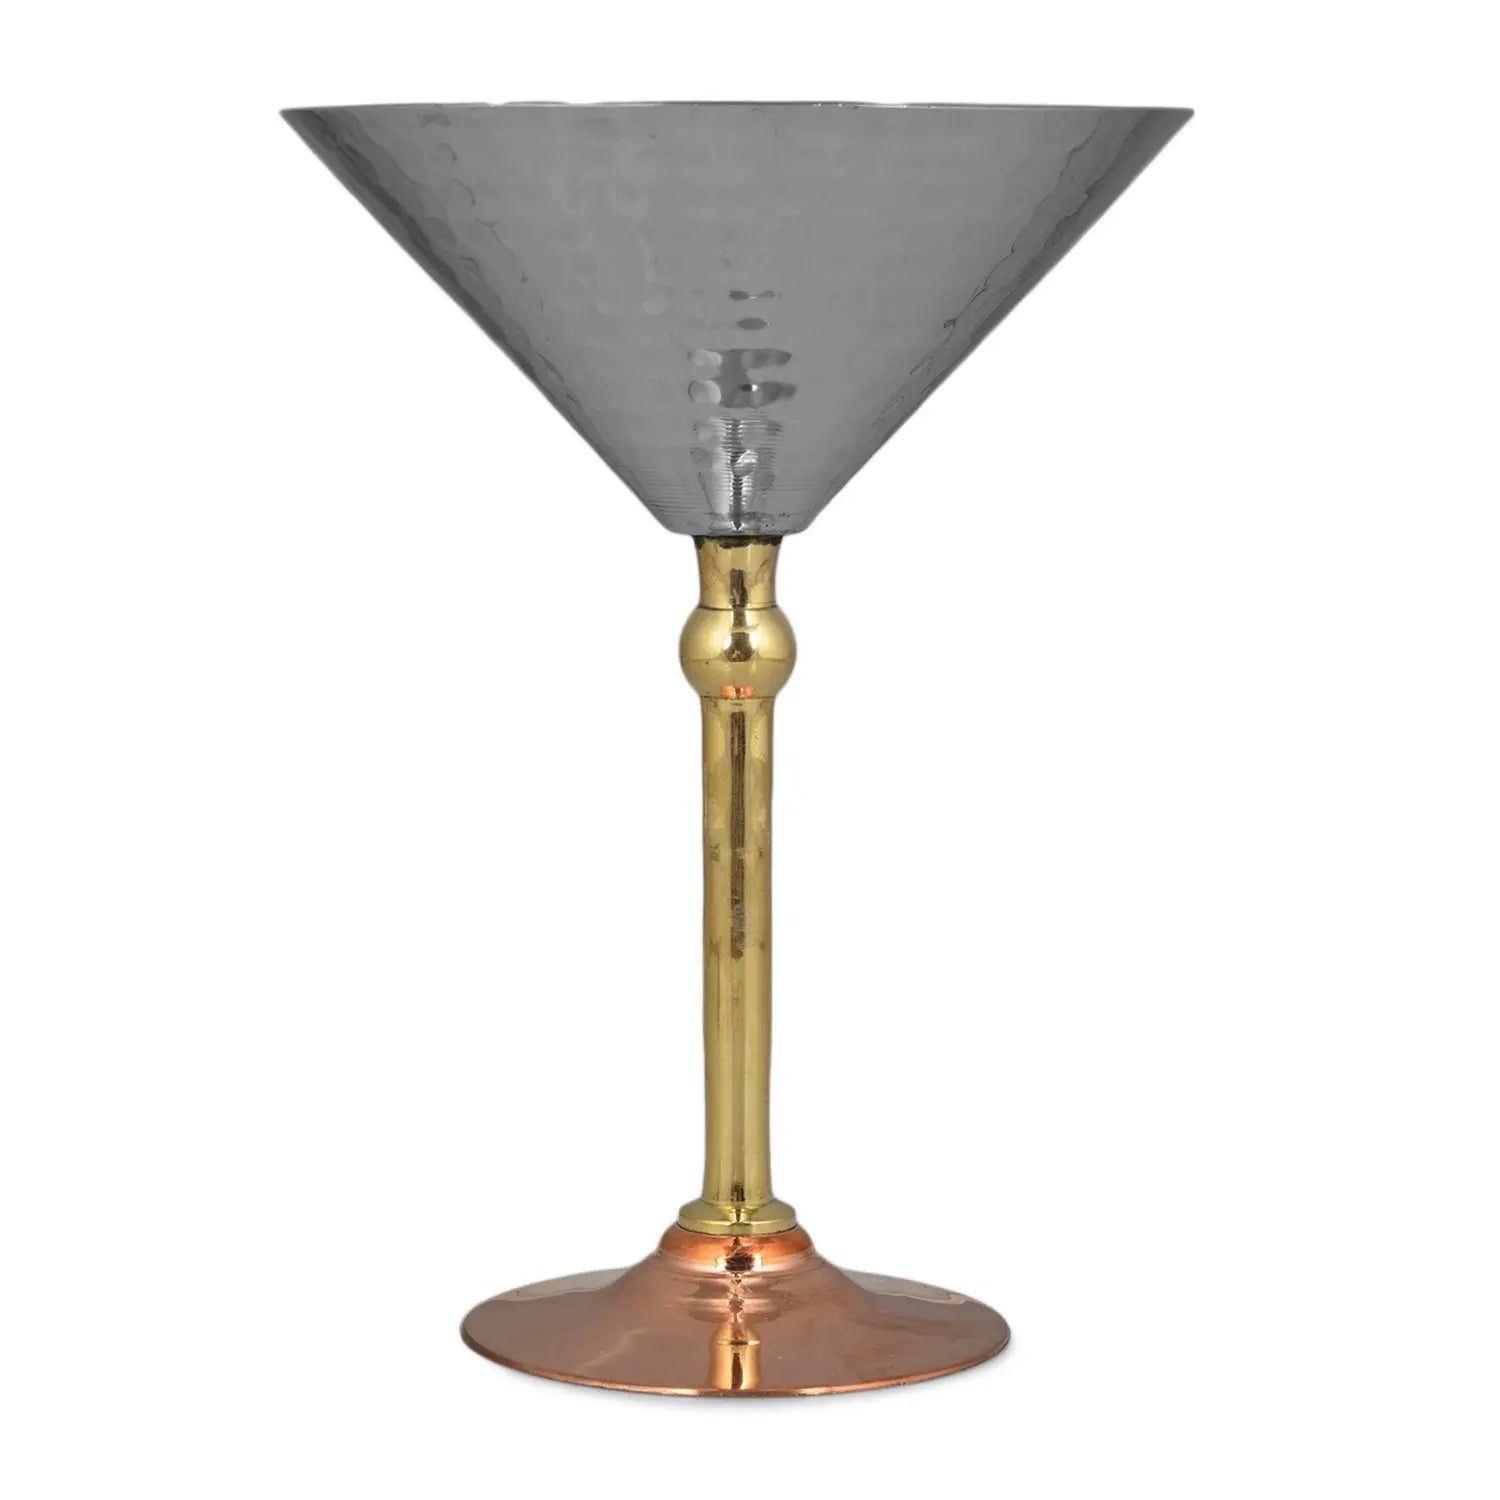 Crockery Wala And Company Steel Hammered Martini Glass Martini Glass With Copper Brass Stand - CROCKERY WALA AND COMPANY 